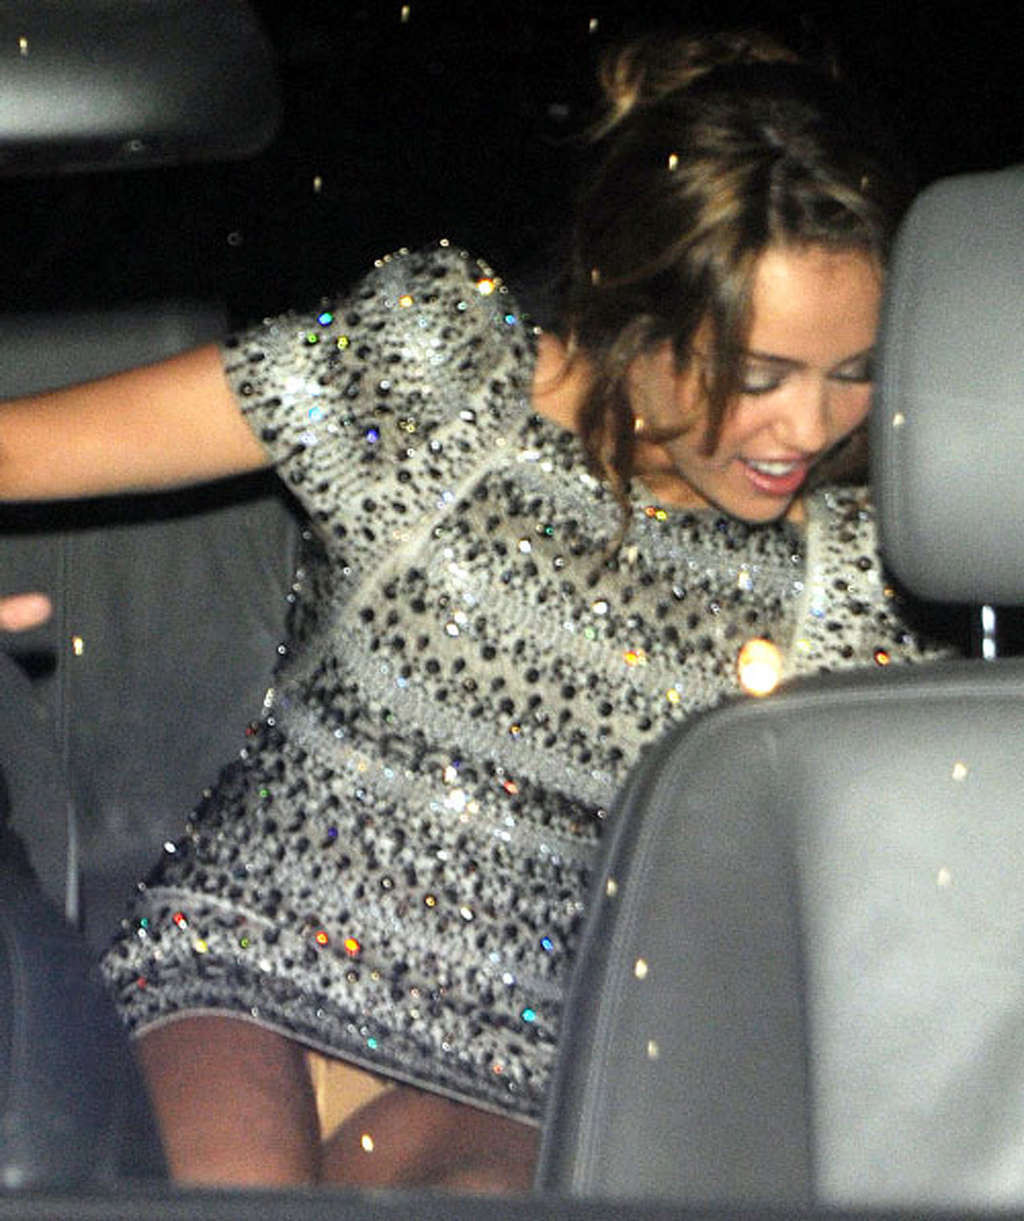 Miley Cyrus very leggy in mini skirt and upskirt in car paparazzi pictures #75361433